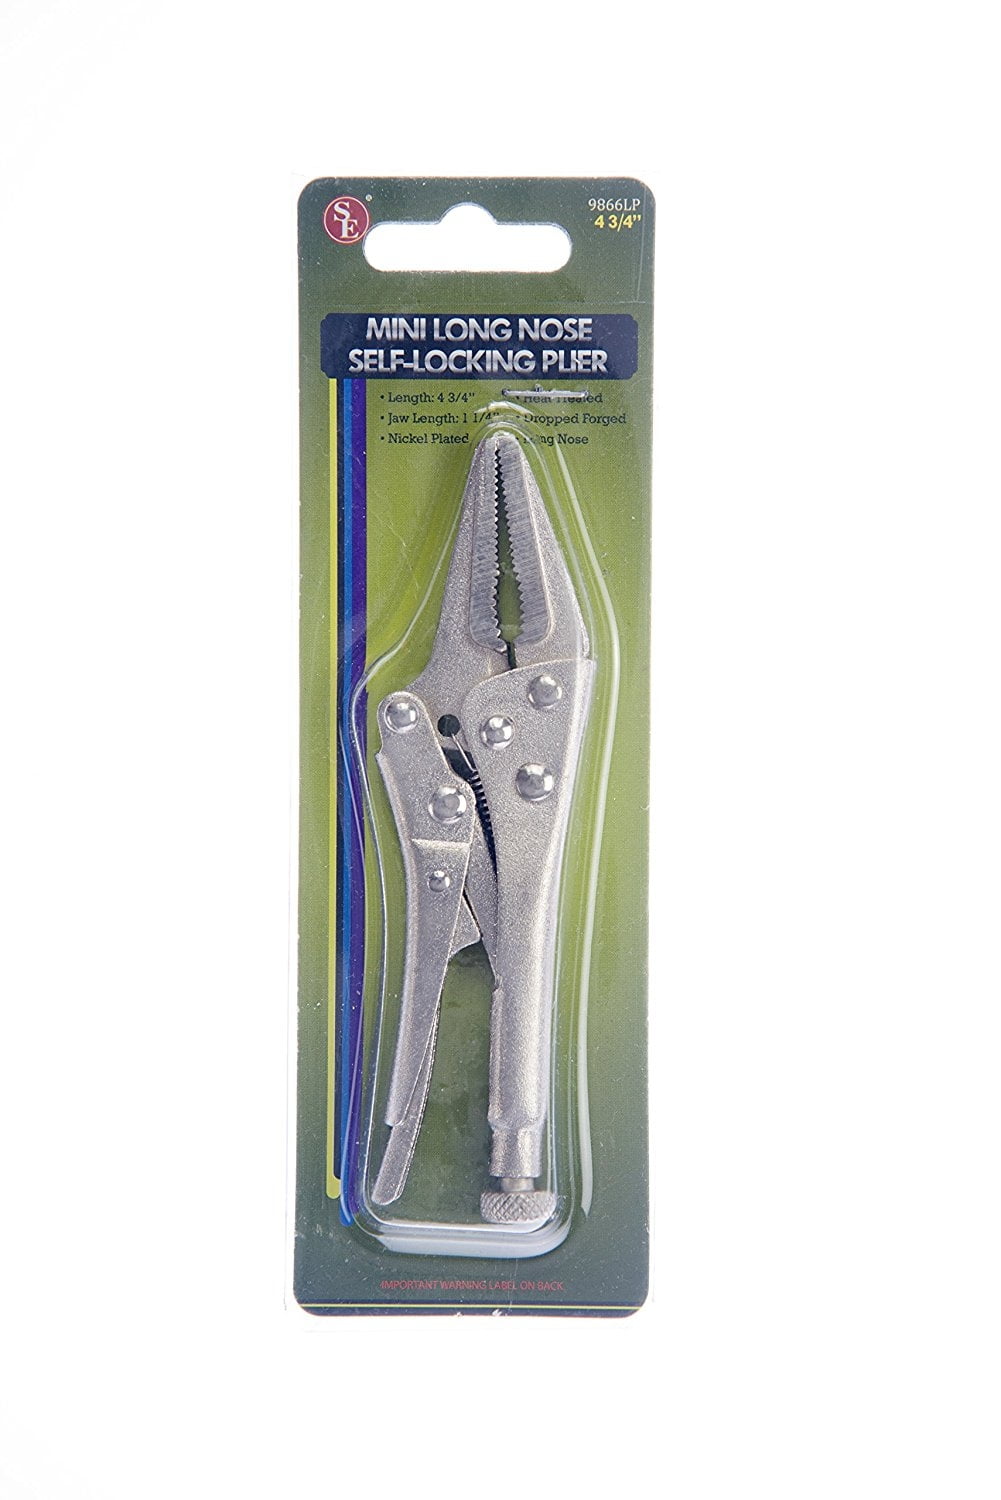 SE 9866LP 4-3/4 Mini Self-Locking Long Nose Plier with Quick-Action Release